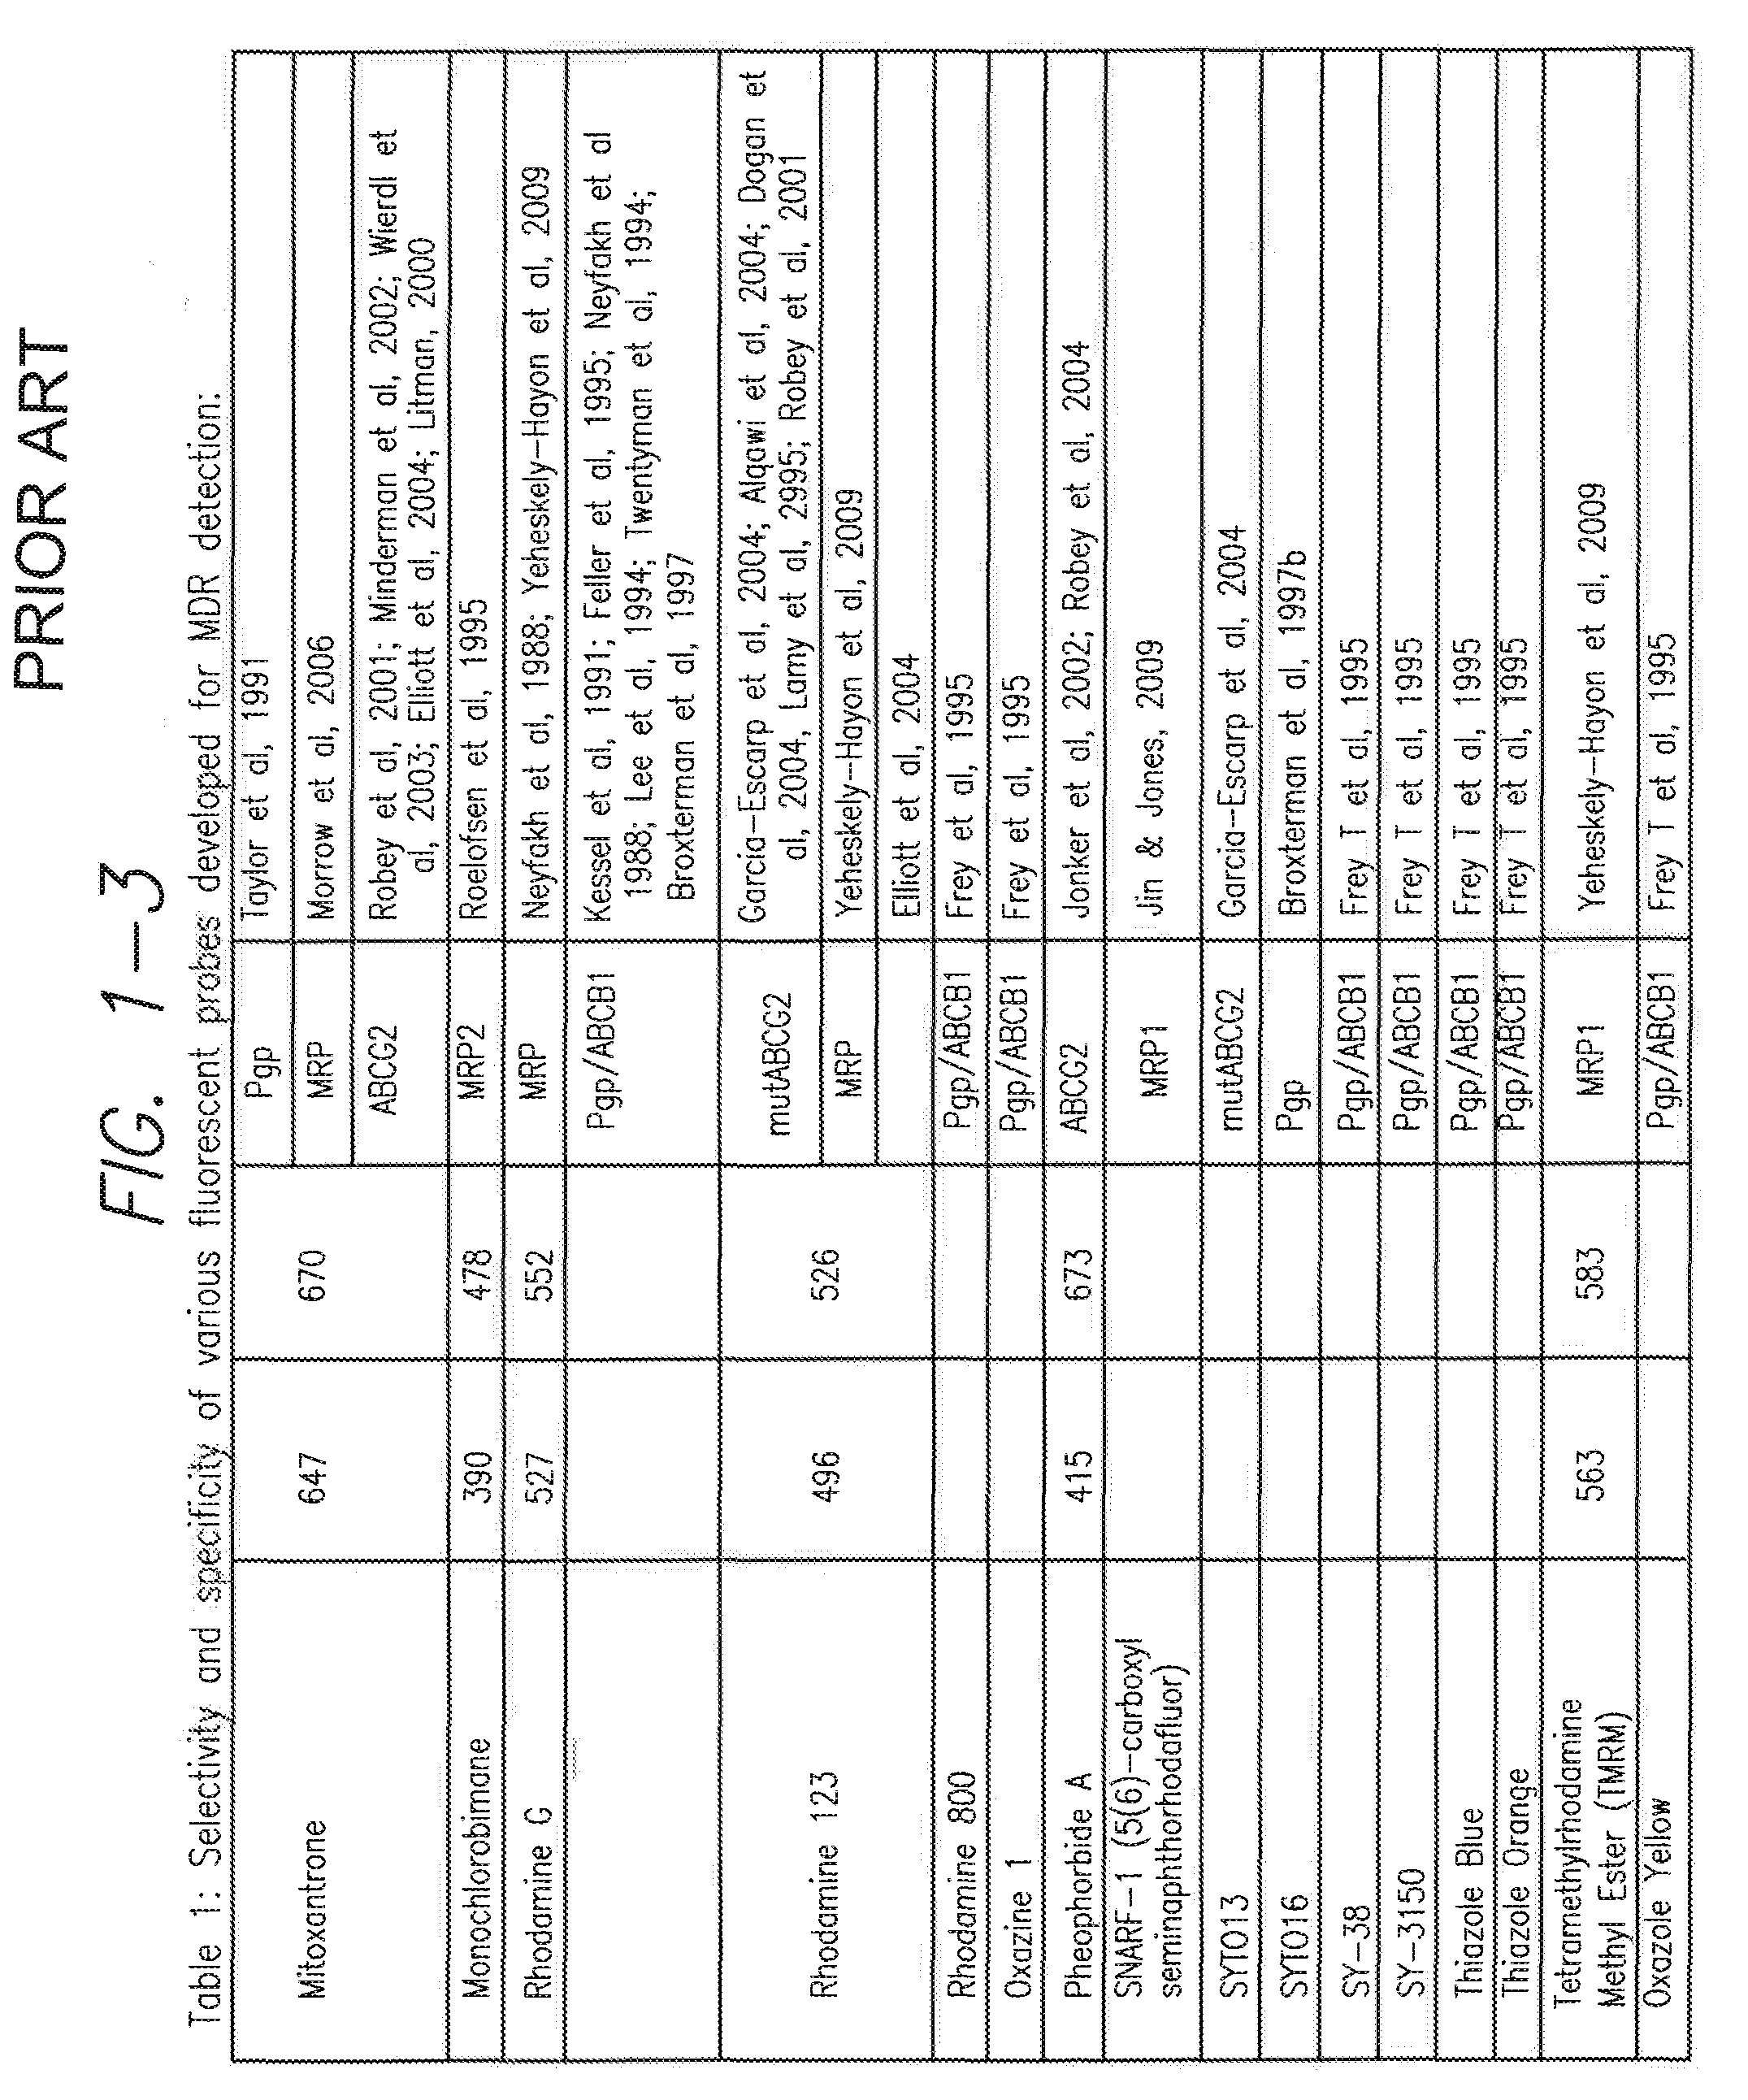 Processes and kits for determining multi-drug resistance of cells